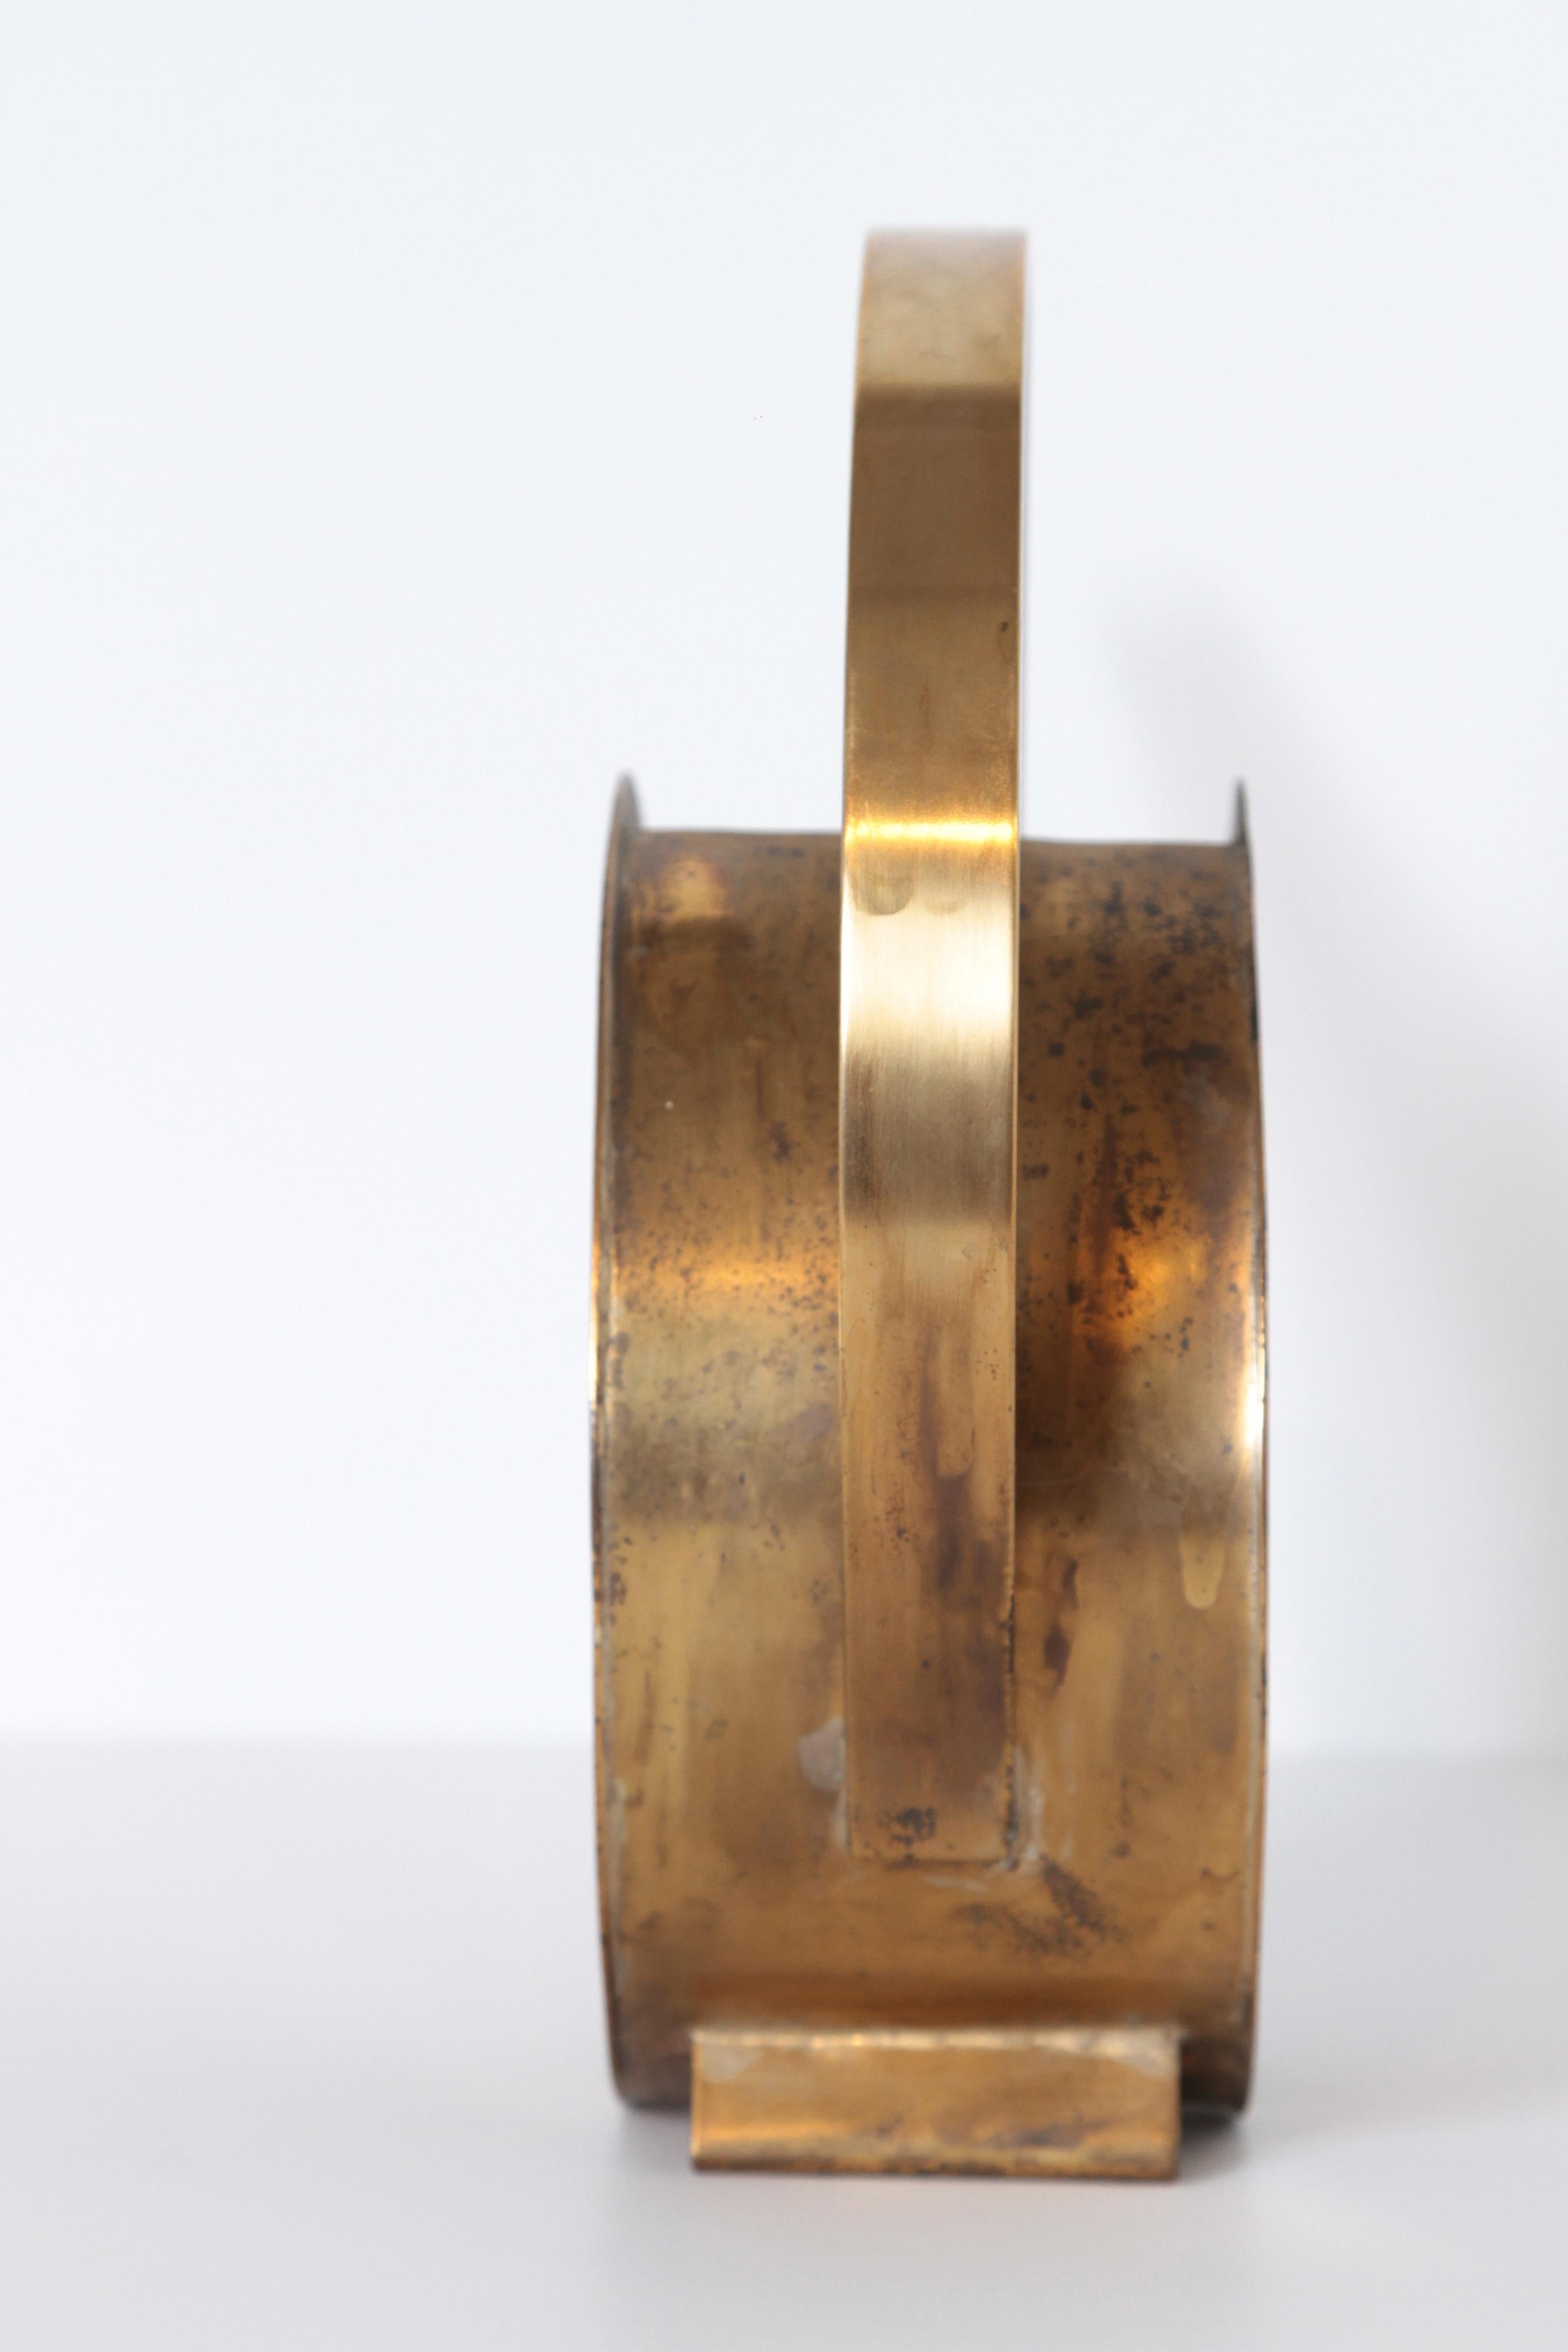 Plated Modernist Design 20th Century Brass Watering Cans, Bauhaus Influenced For Sale